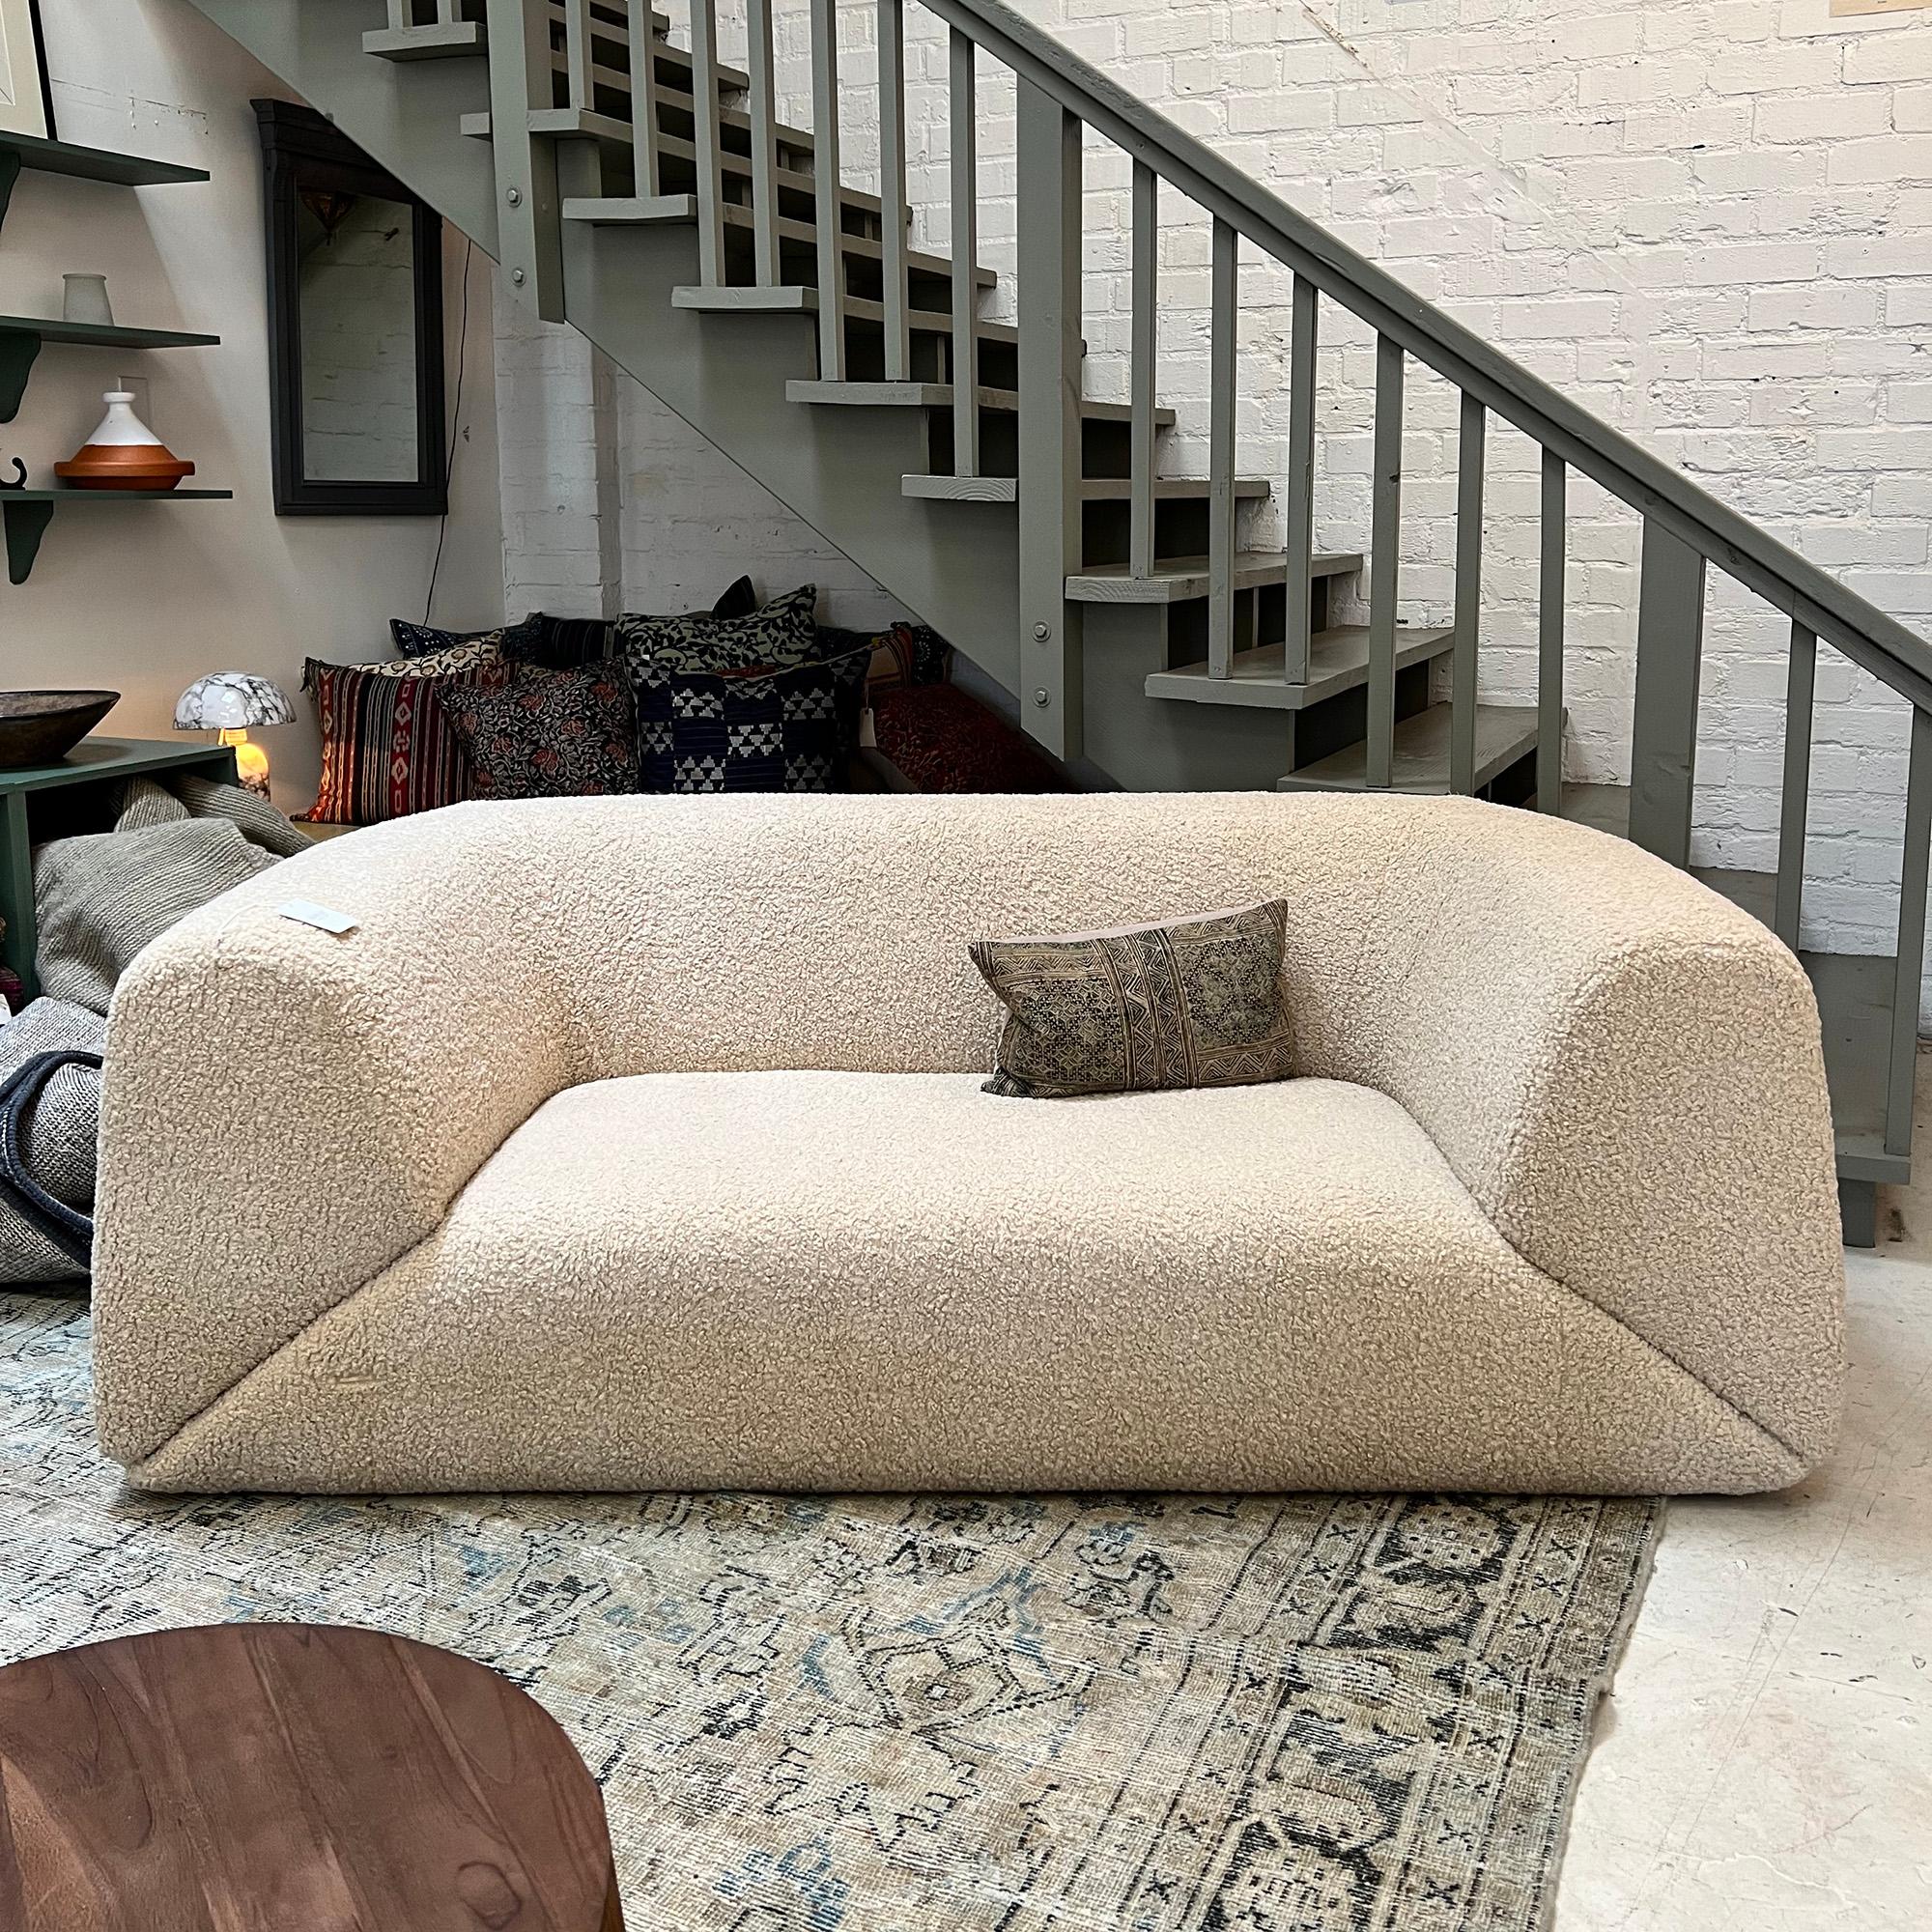 Gorgeous vintage sofa newly reupholstered in shearling. See in person at our Los Angeles showroom.